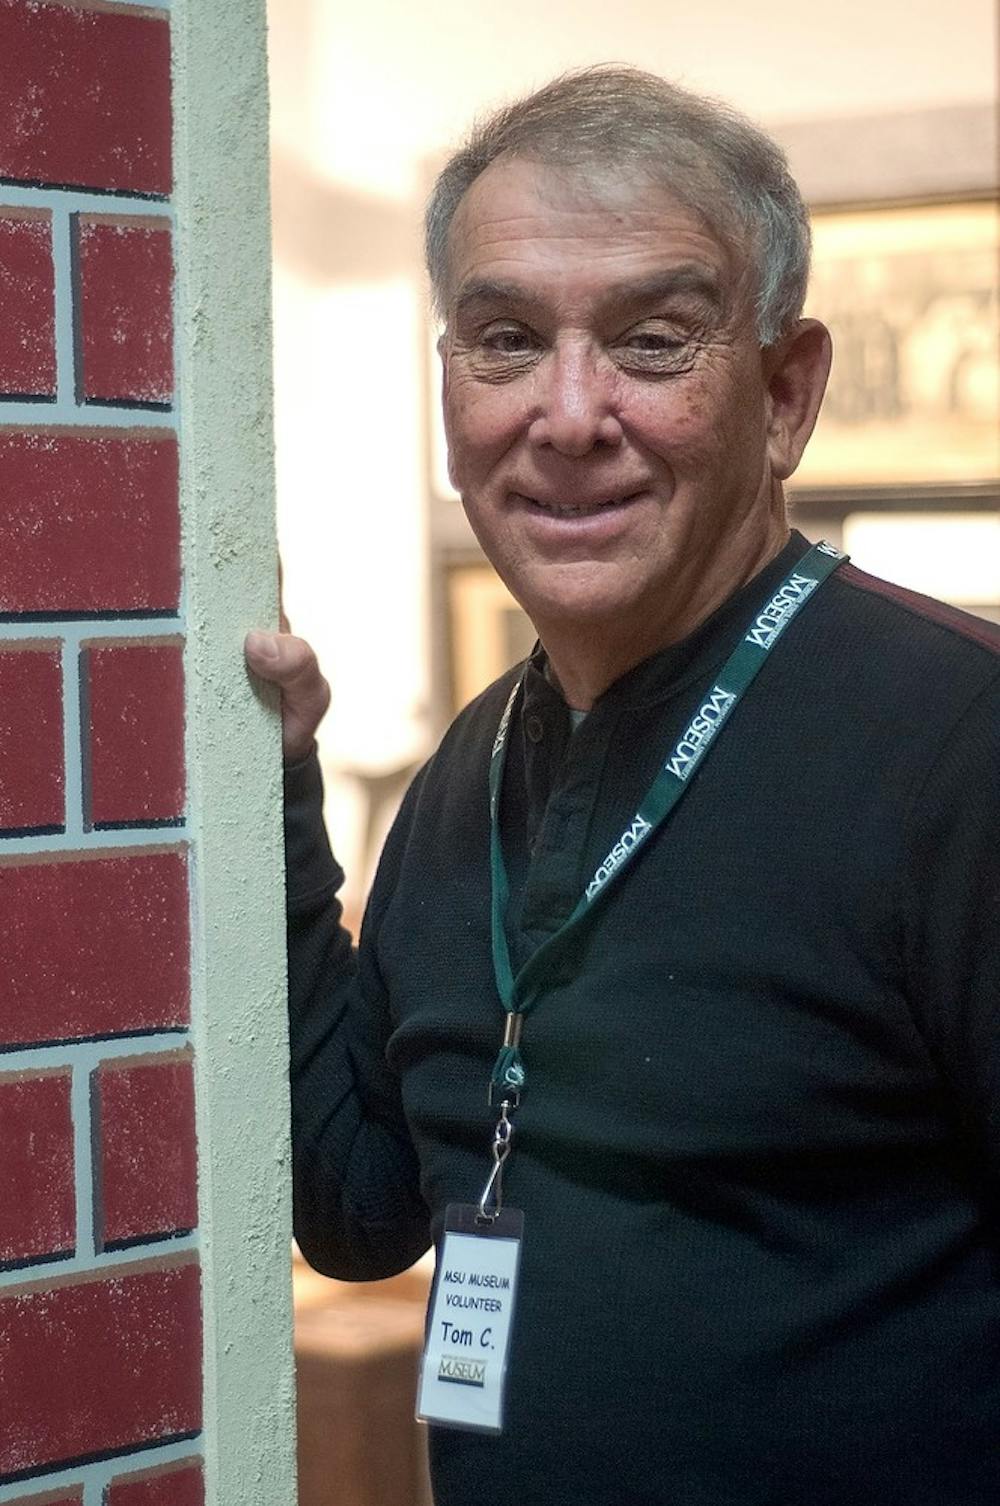 <p>MSU alumnus Tom Corwin poses for a portrait April 13, 2015, in the MSU museum. Corwin said he volunteers at the museum to keep himself busy in retirement. Kelsey Feldpausch/ The State News</p>